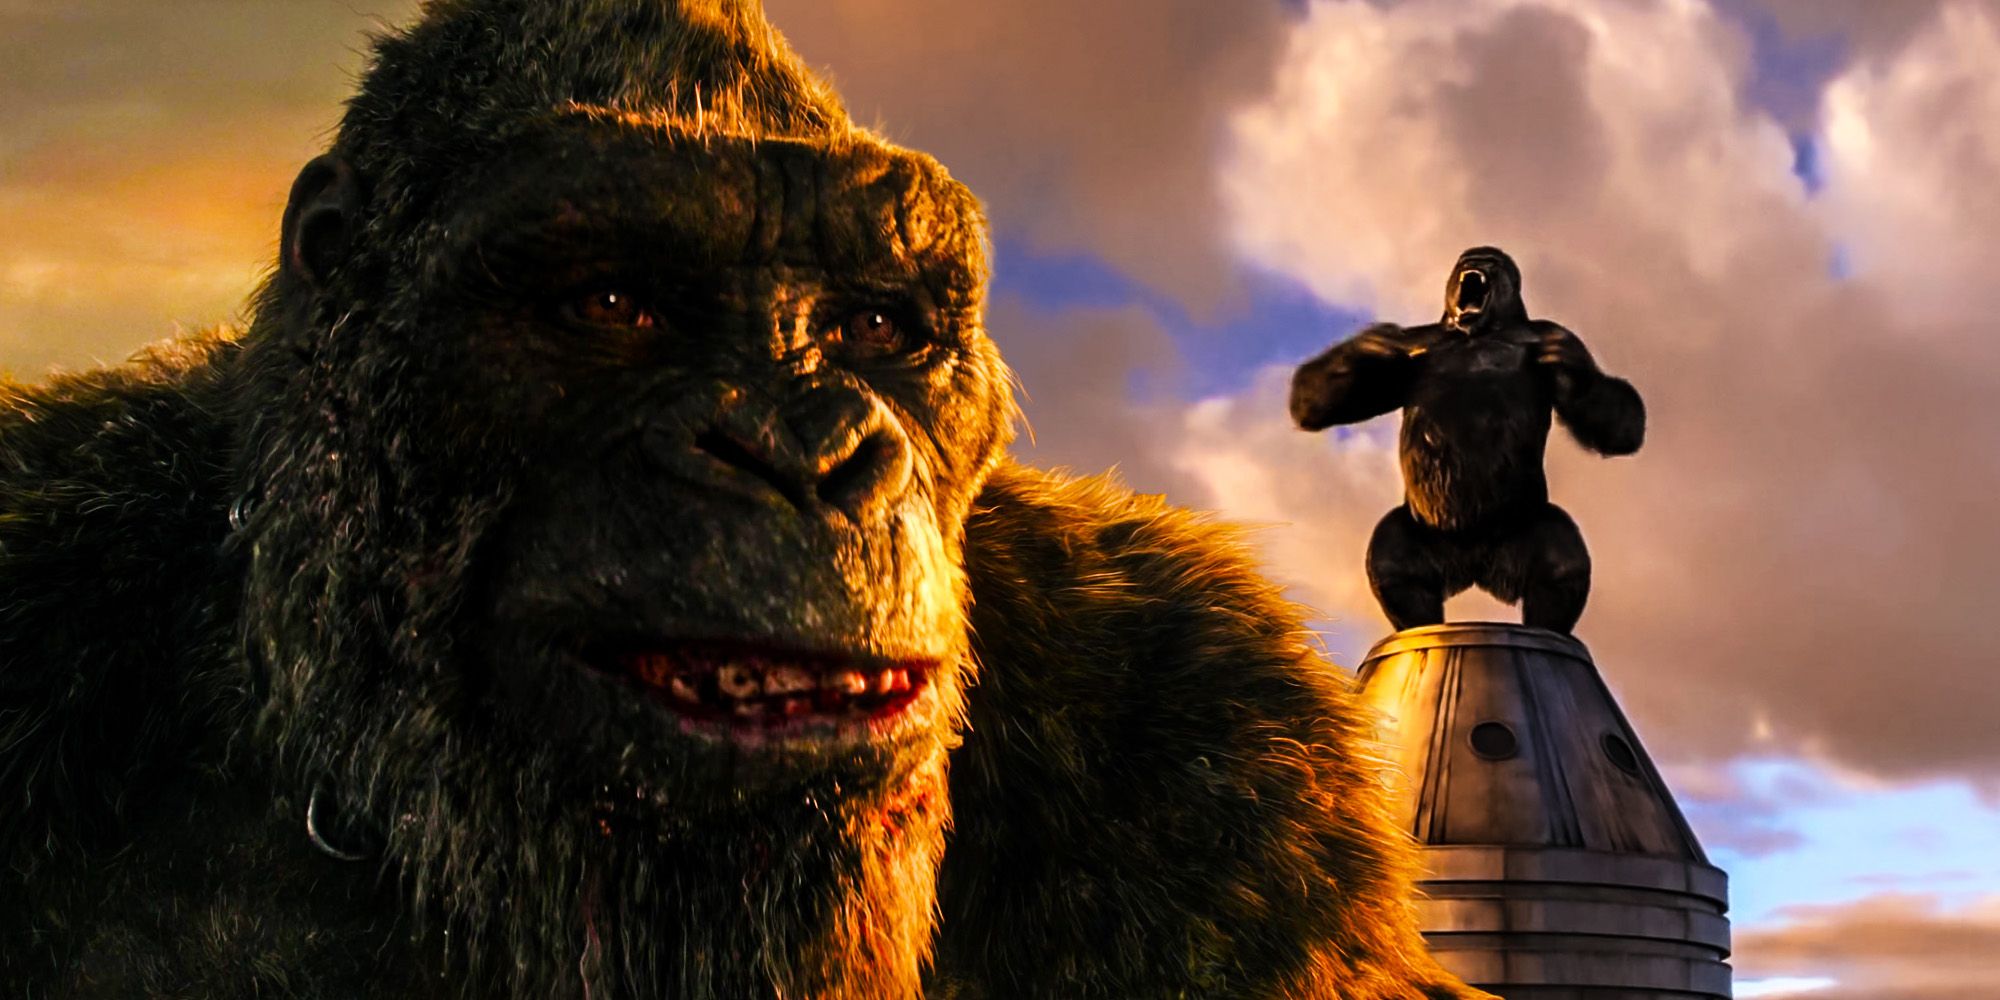 Will king kong get his famous moment empire state building in the monsterverse